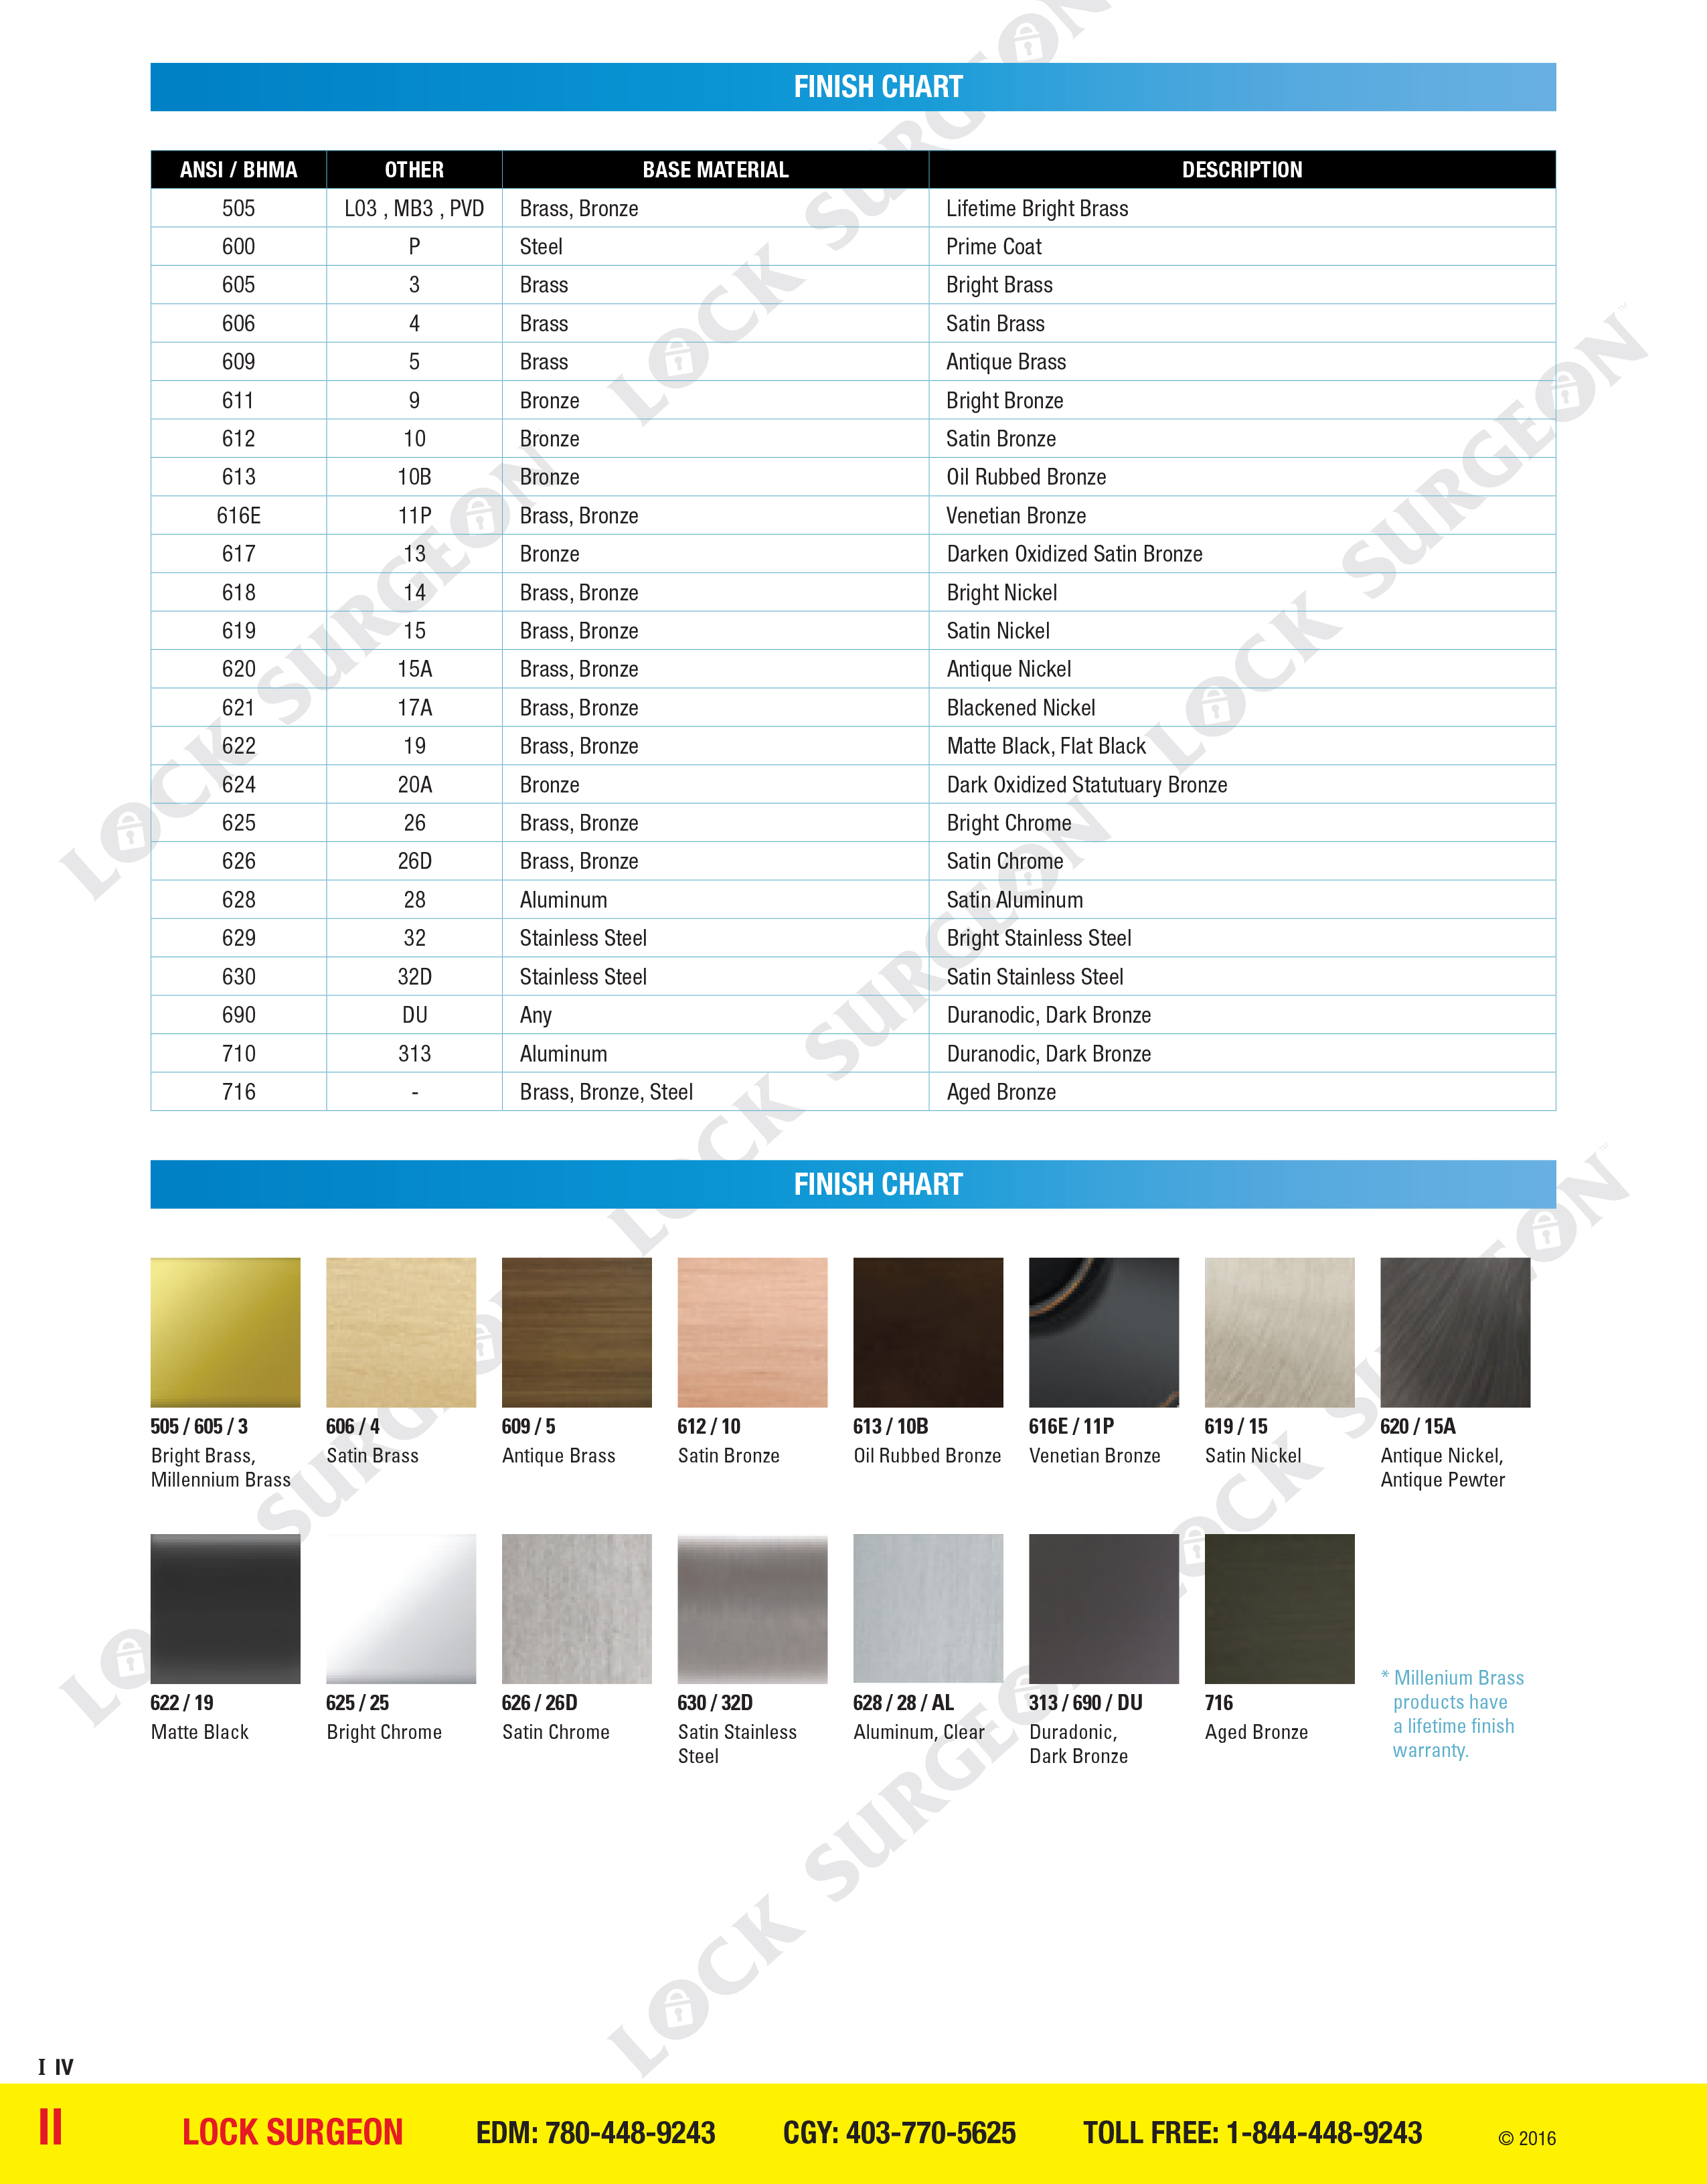 Reference chart for Colour finishes available on a variety of products at Lock Surgeon Cochrane.